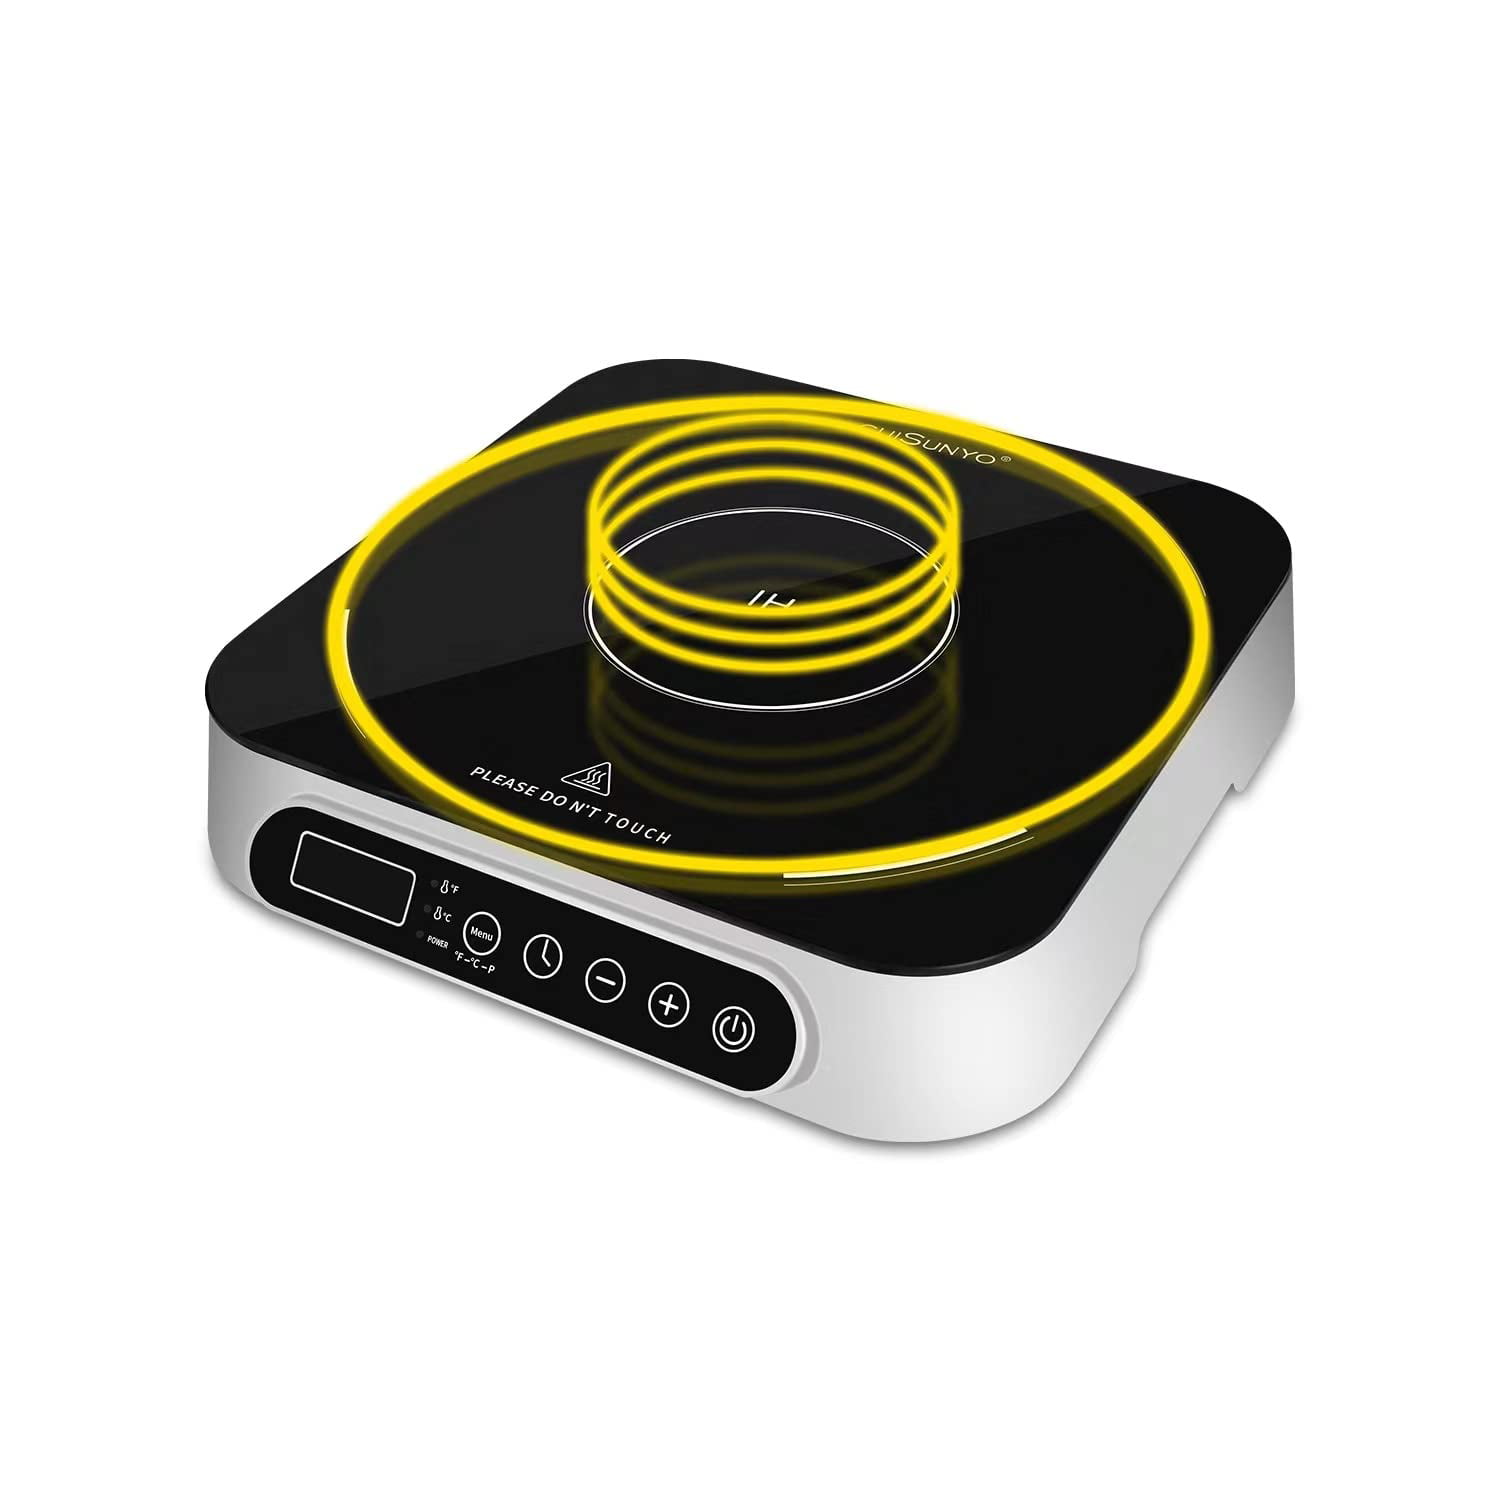 CUISUNYO Dual Induction Cooktop - Countertop Burners, 1800W Power Sharing Electric  Portable Stove with Temperature and Power